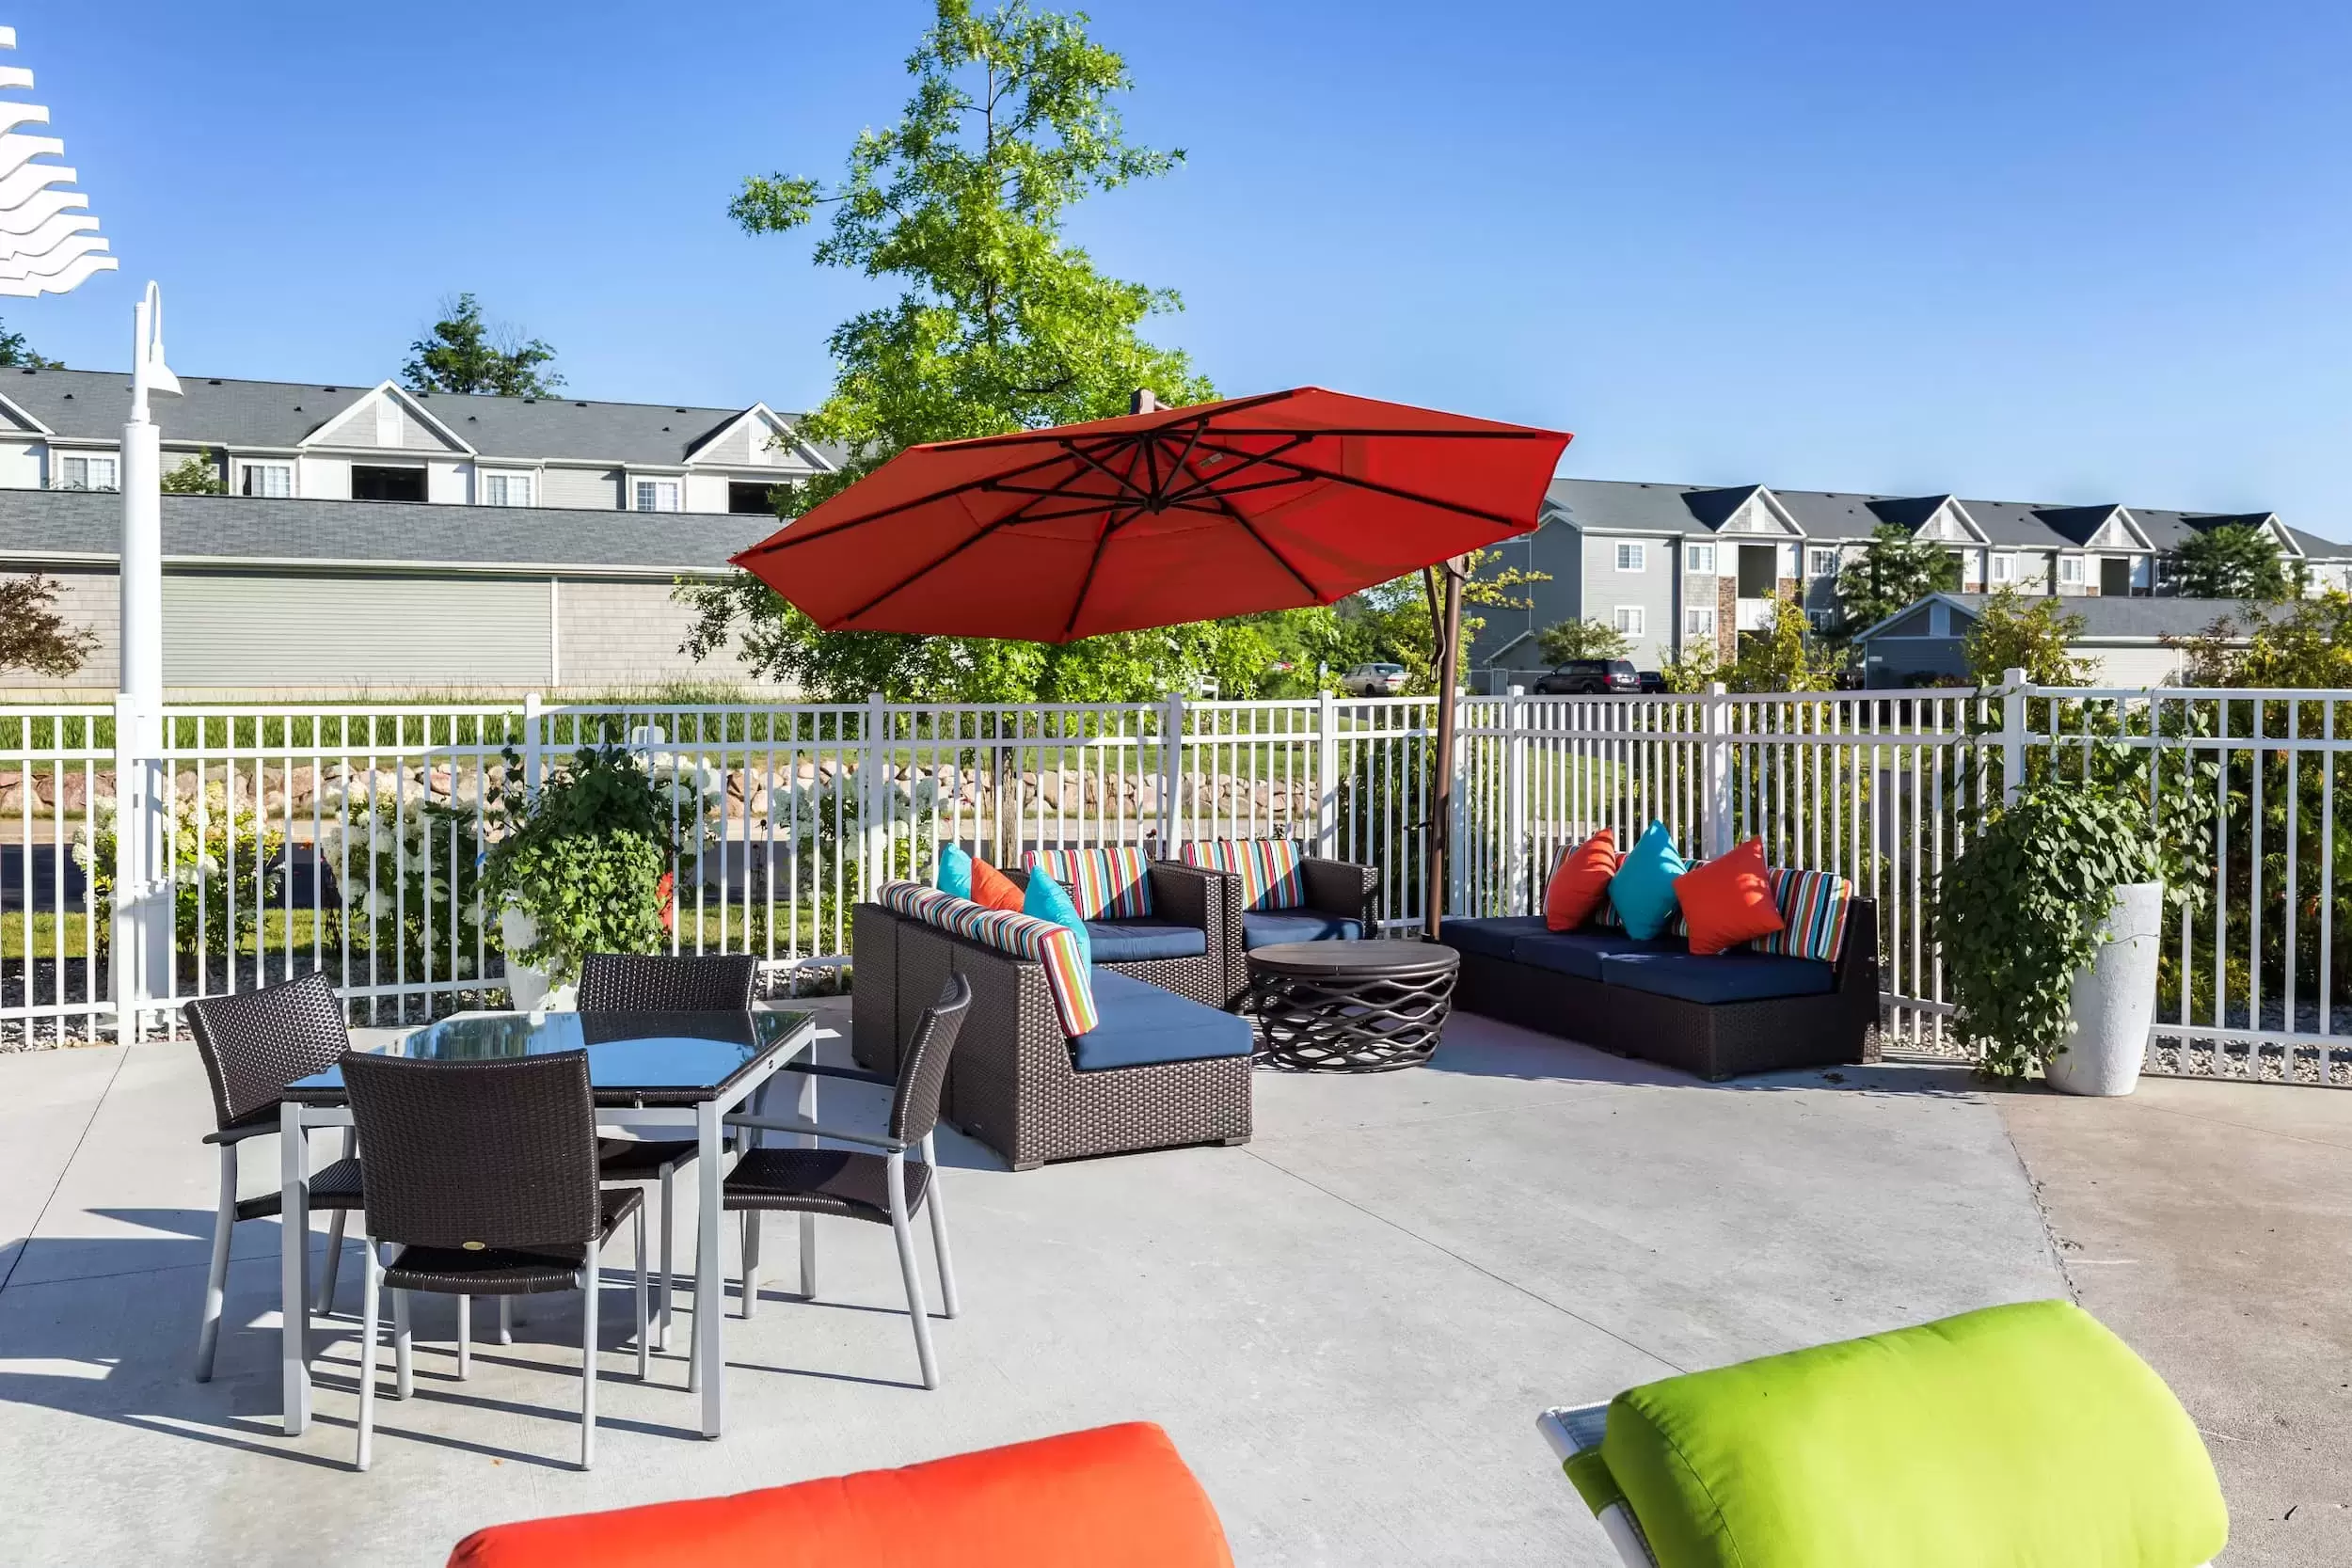 Patio furniture near the pool arranged to make the perfect place to socialize or relax.